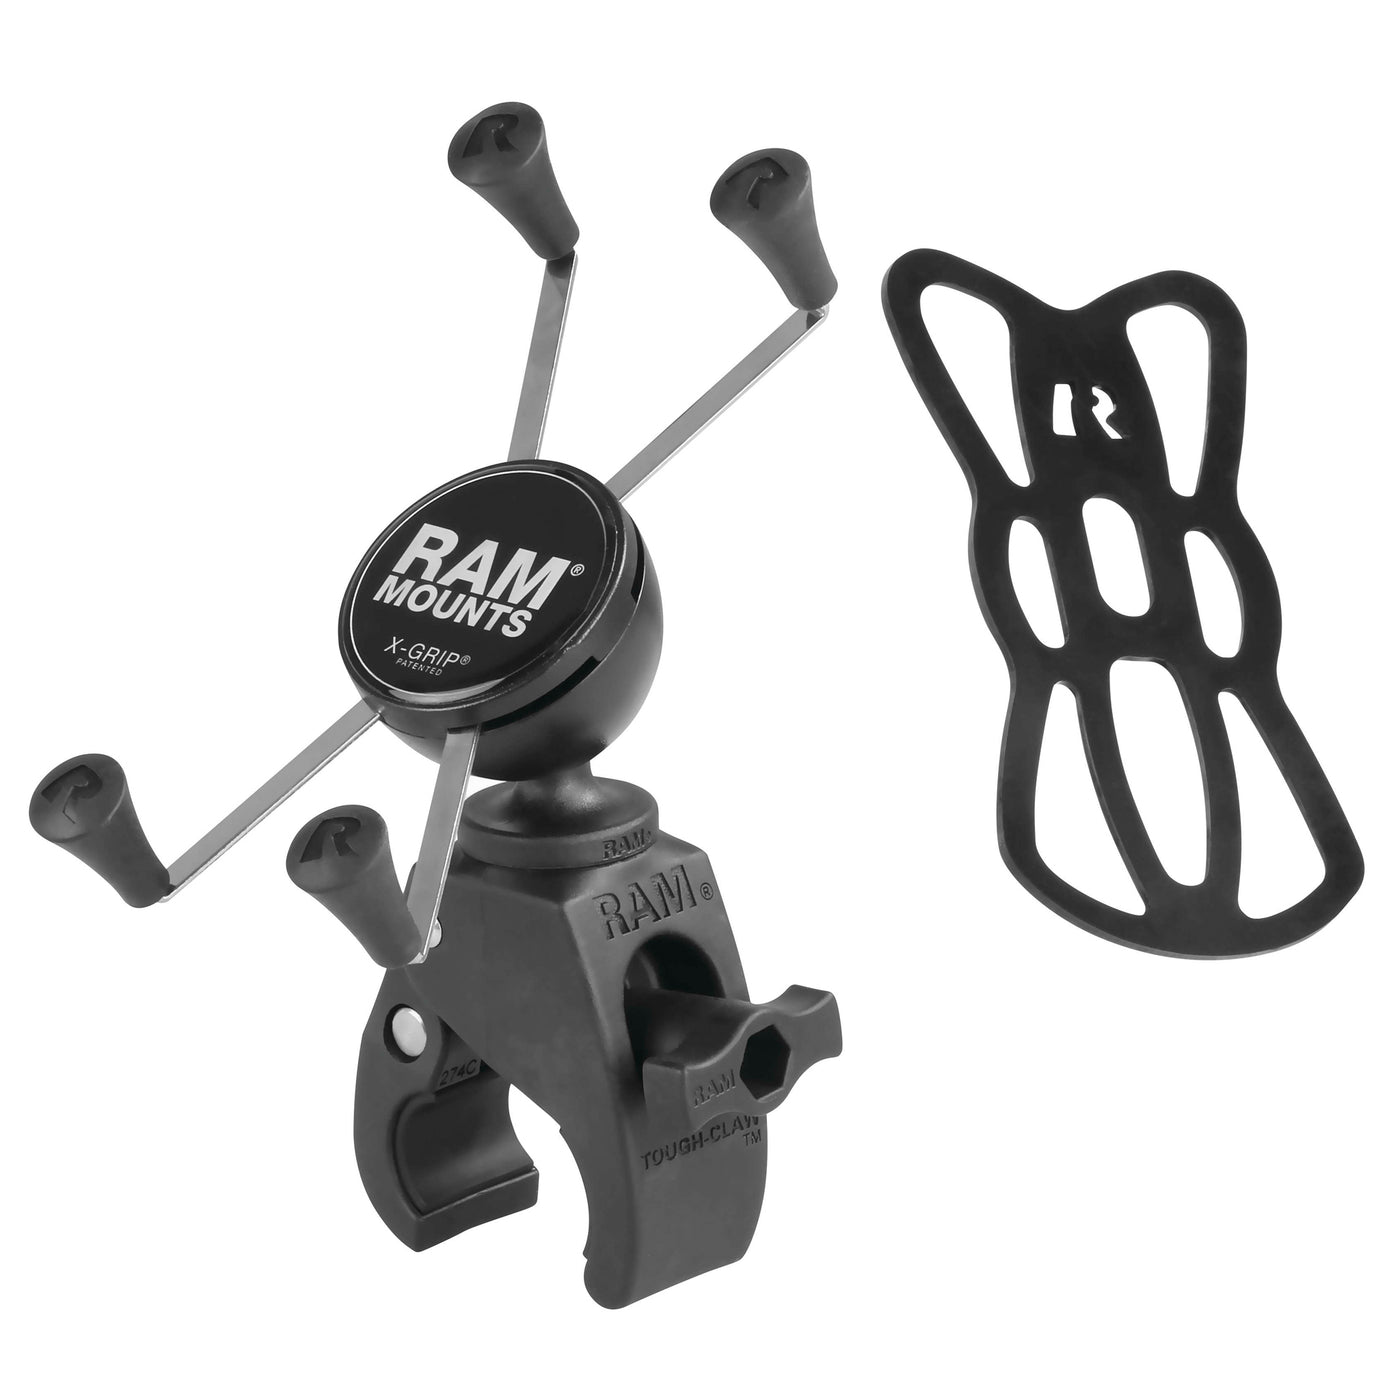 Ram Mounts Tough-claw Mount With X-grip Cradle - Phablet Phones Packed